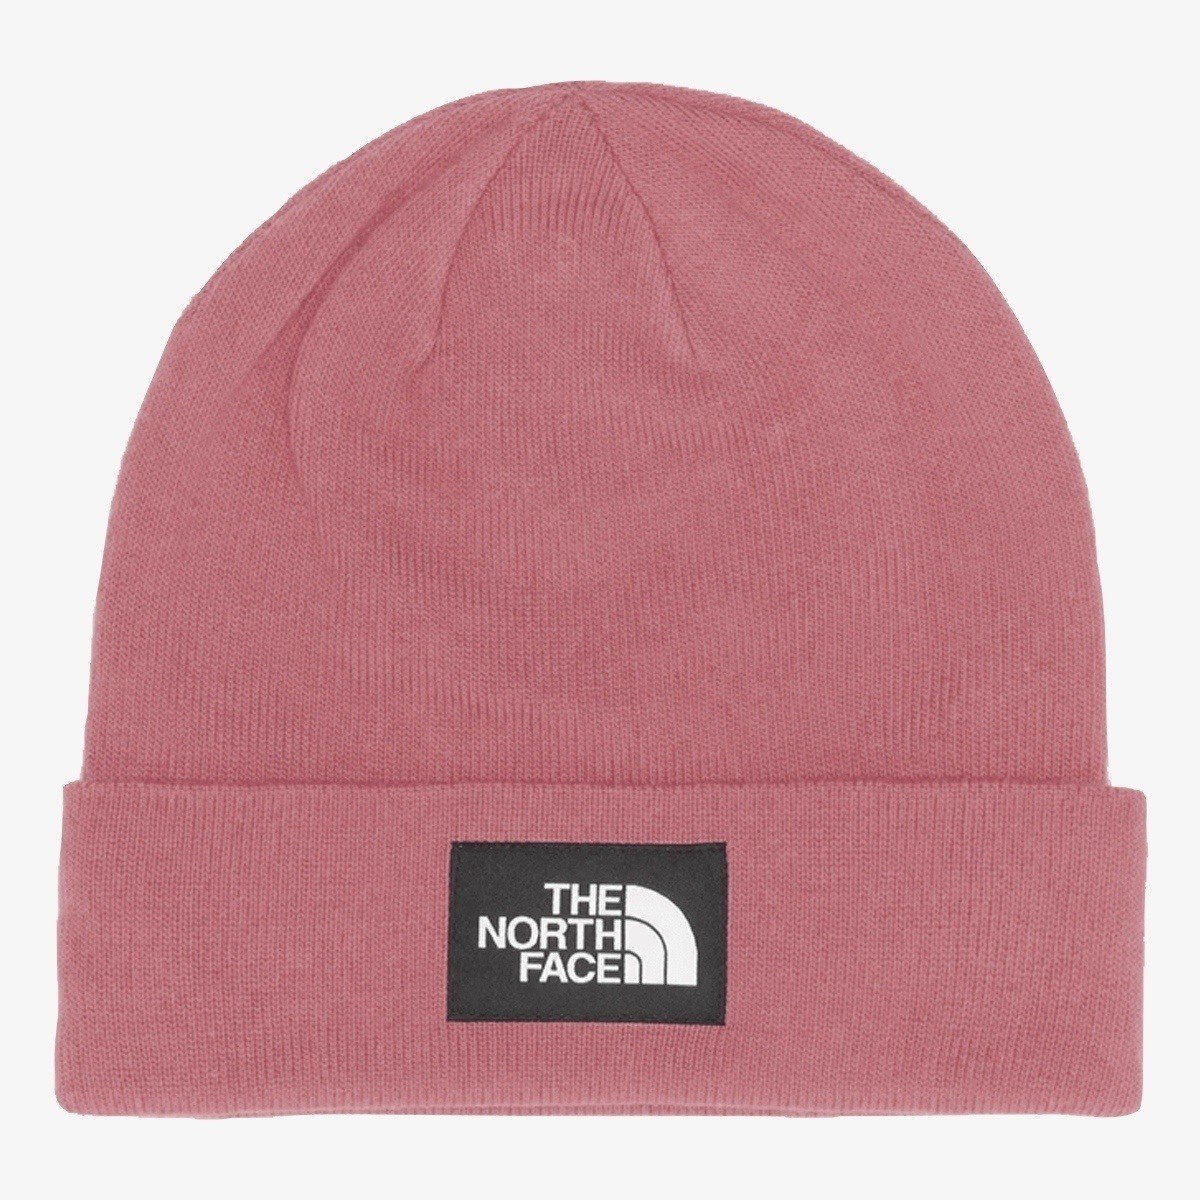 The North Face DOCK WORKER RECYCLED BEANIE 